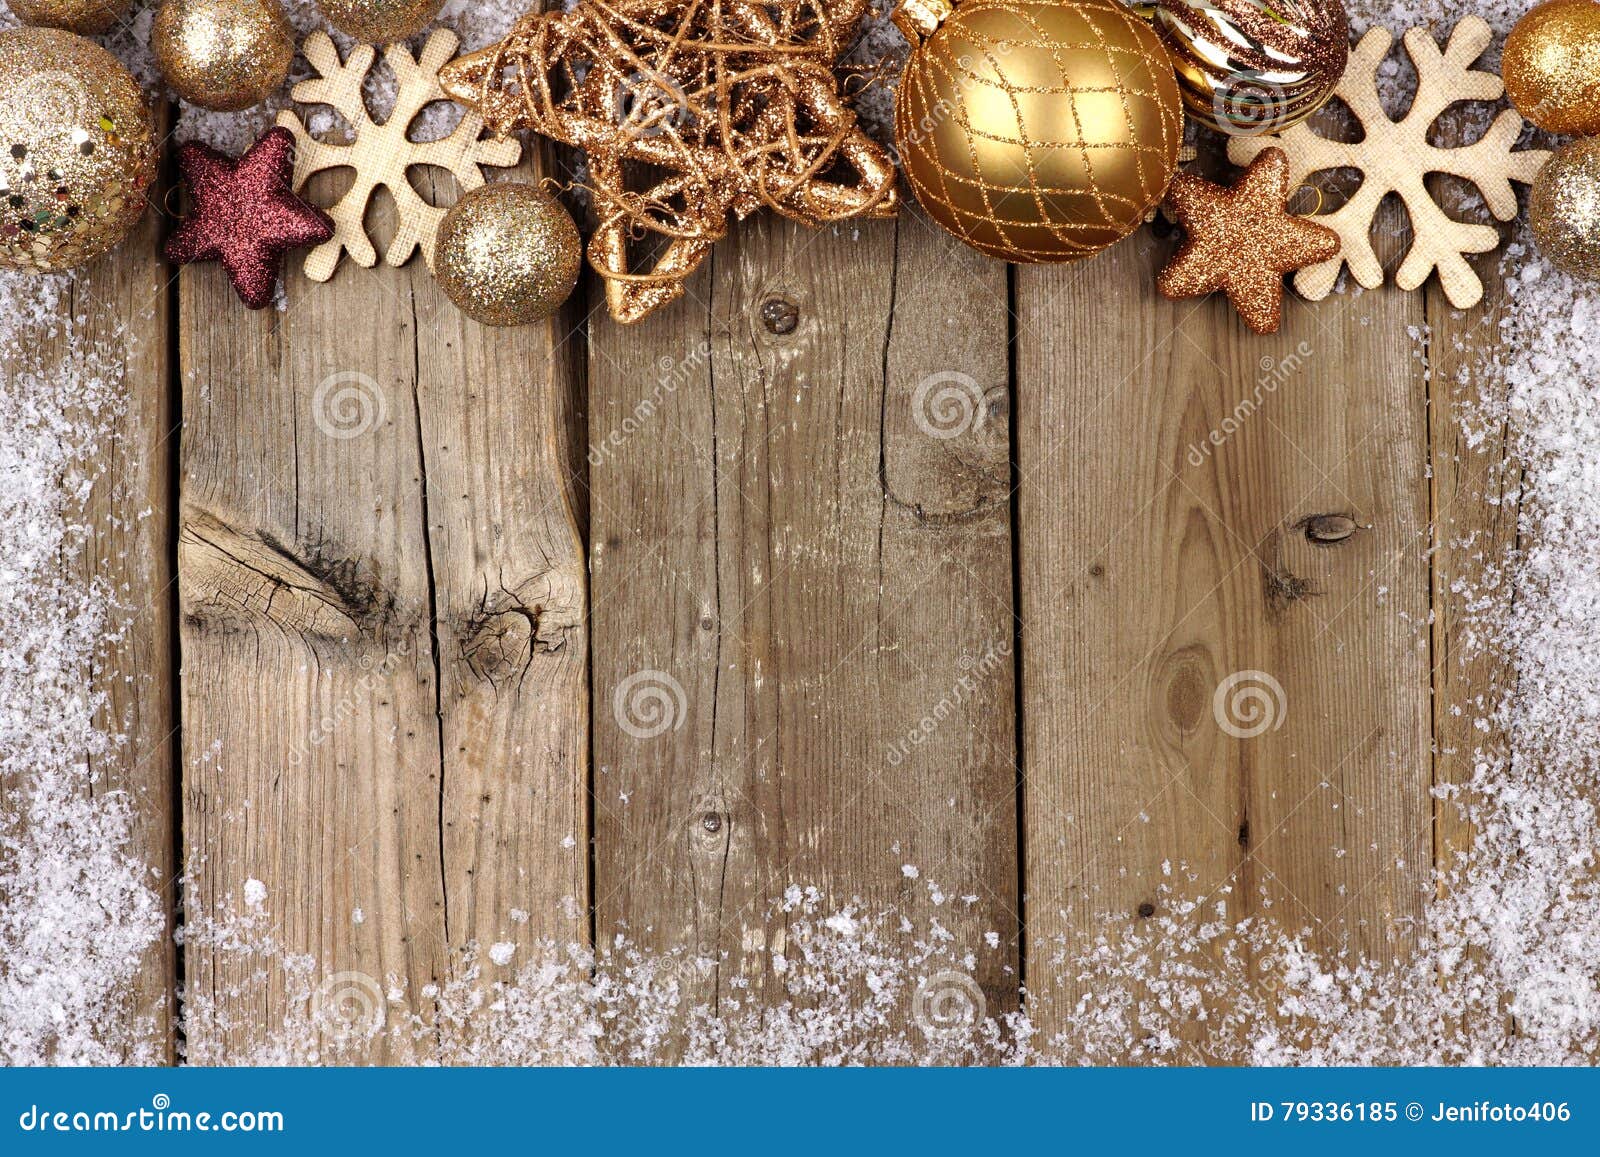 Gold Christmas Ornament Top Border with Snow Frame on Wood Stock Image ...